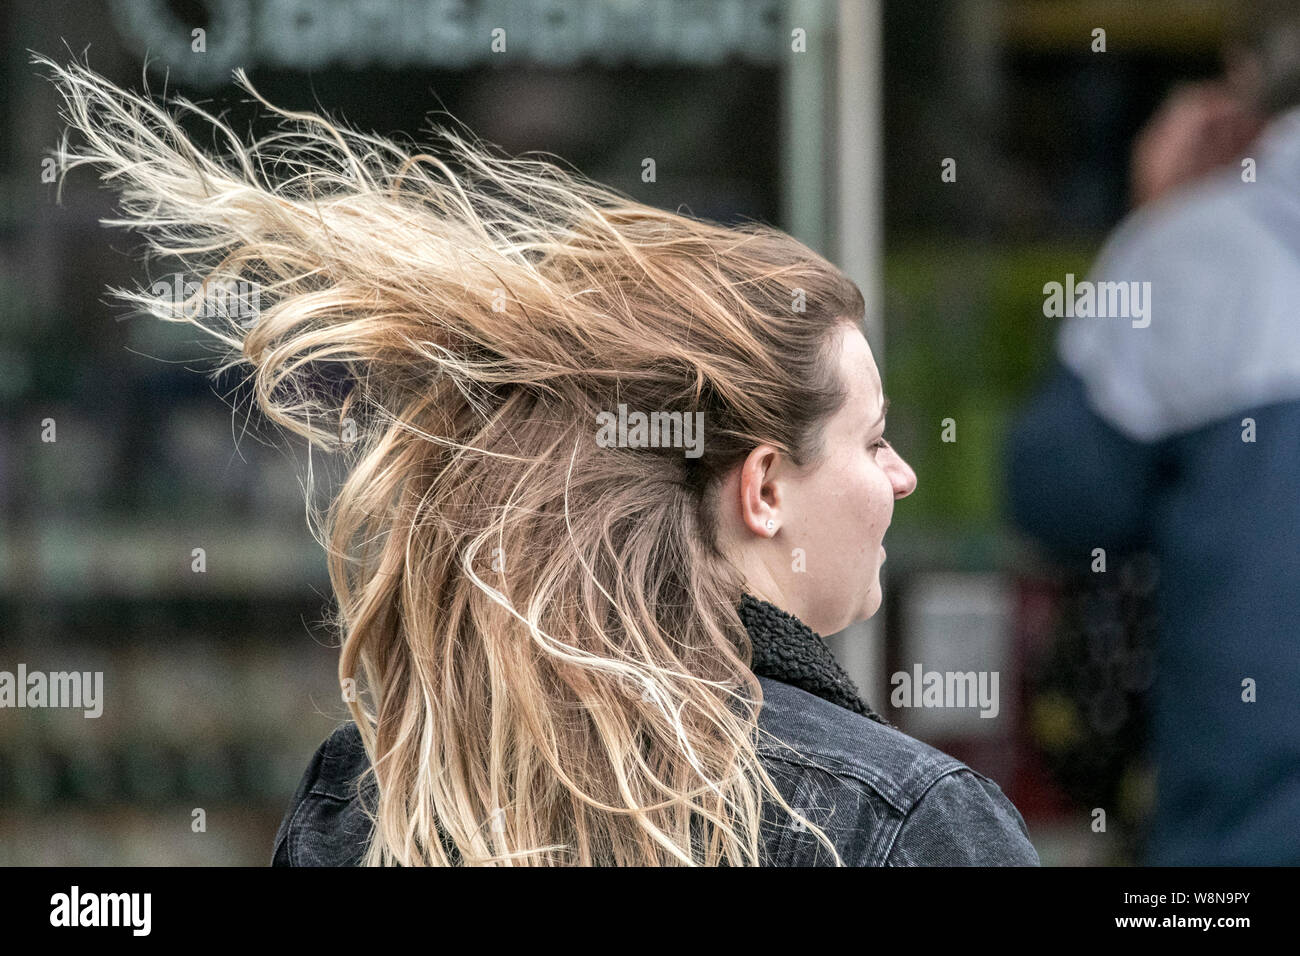 Windswept hair wind blown bad hair day windy weather storm stormy day  landscape windswept, hair, woman, female, wind, portrait, long hair, face,  outdoors, adult, style, day, person, hairstyle, women, fashionable, windy,  head